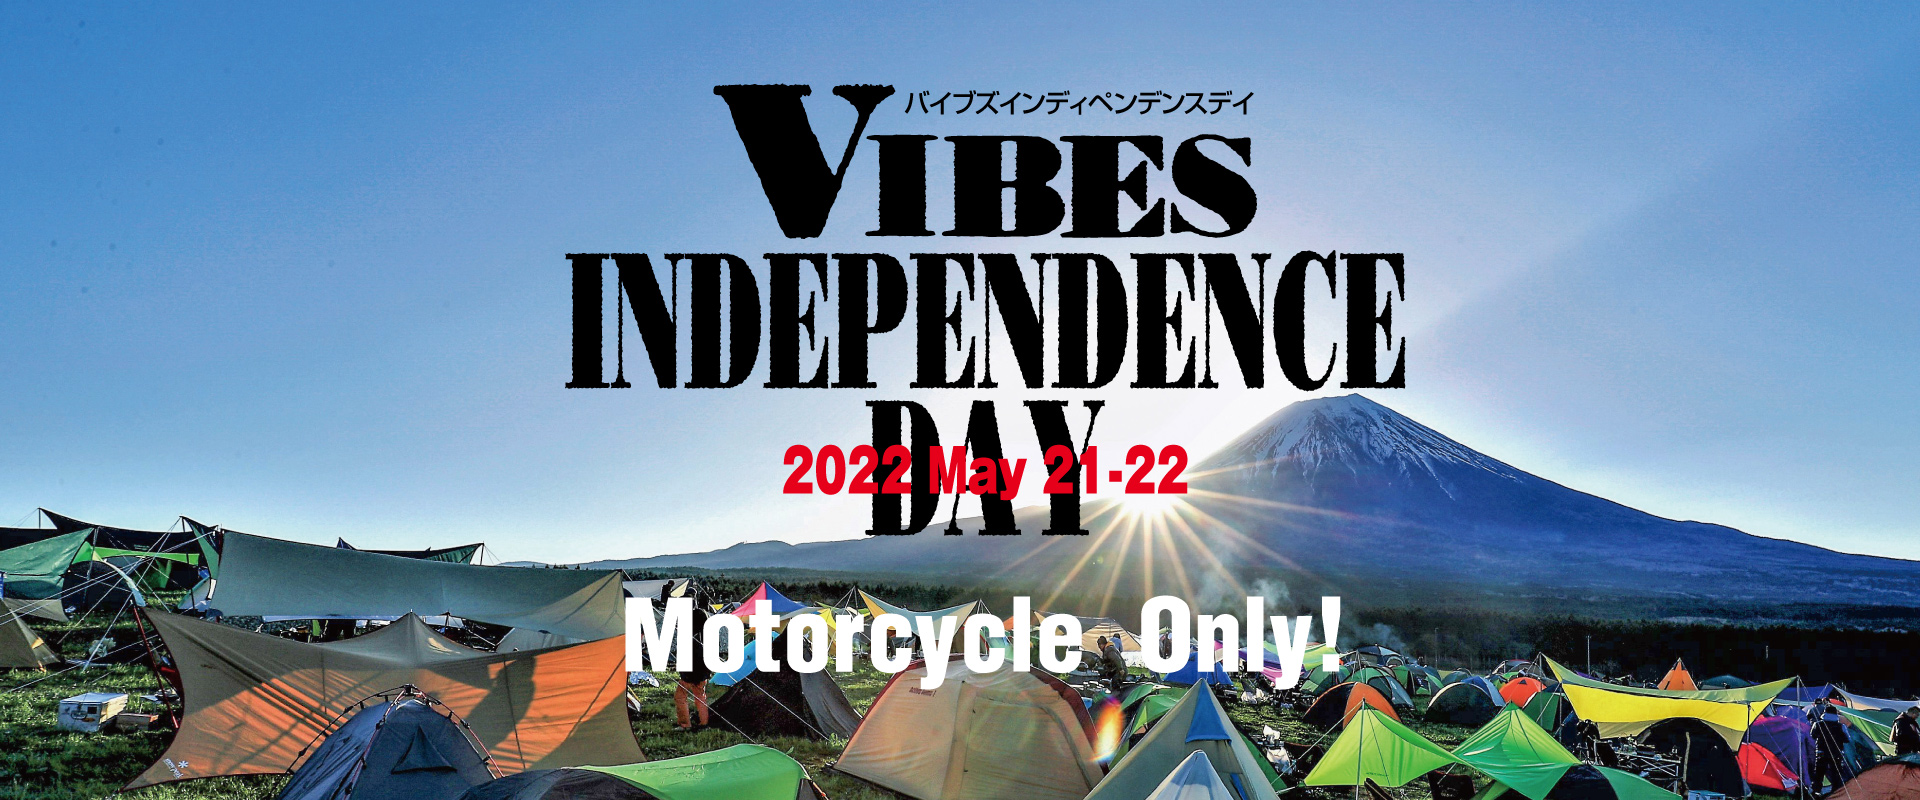 VIBES WEB｜VIBES Official Web Site ハーレー・ダビッドソン専門雑誌 